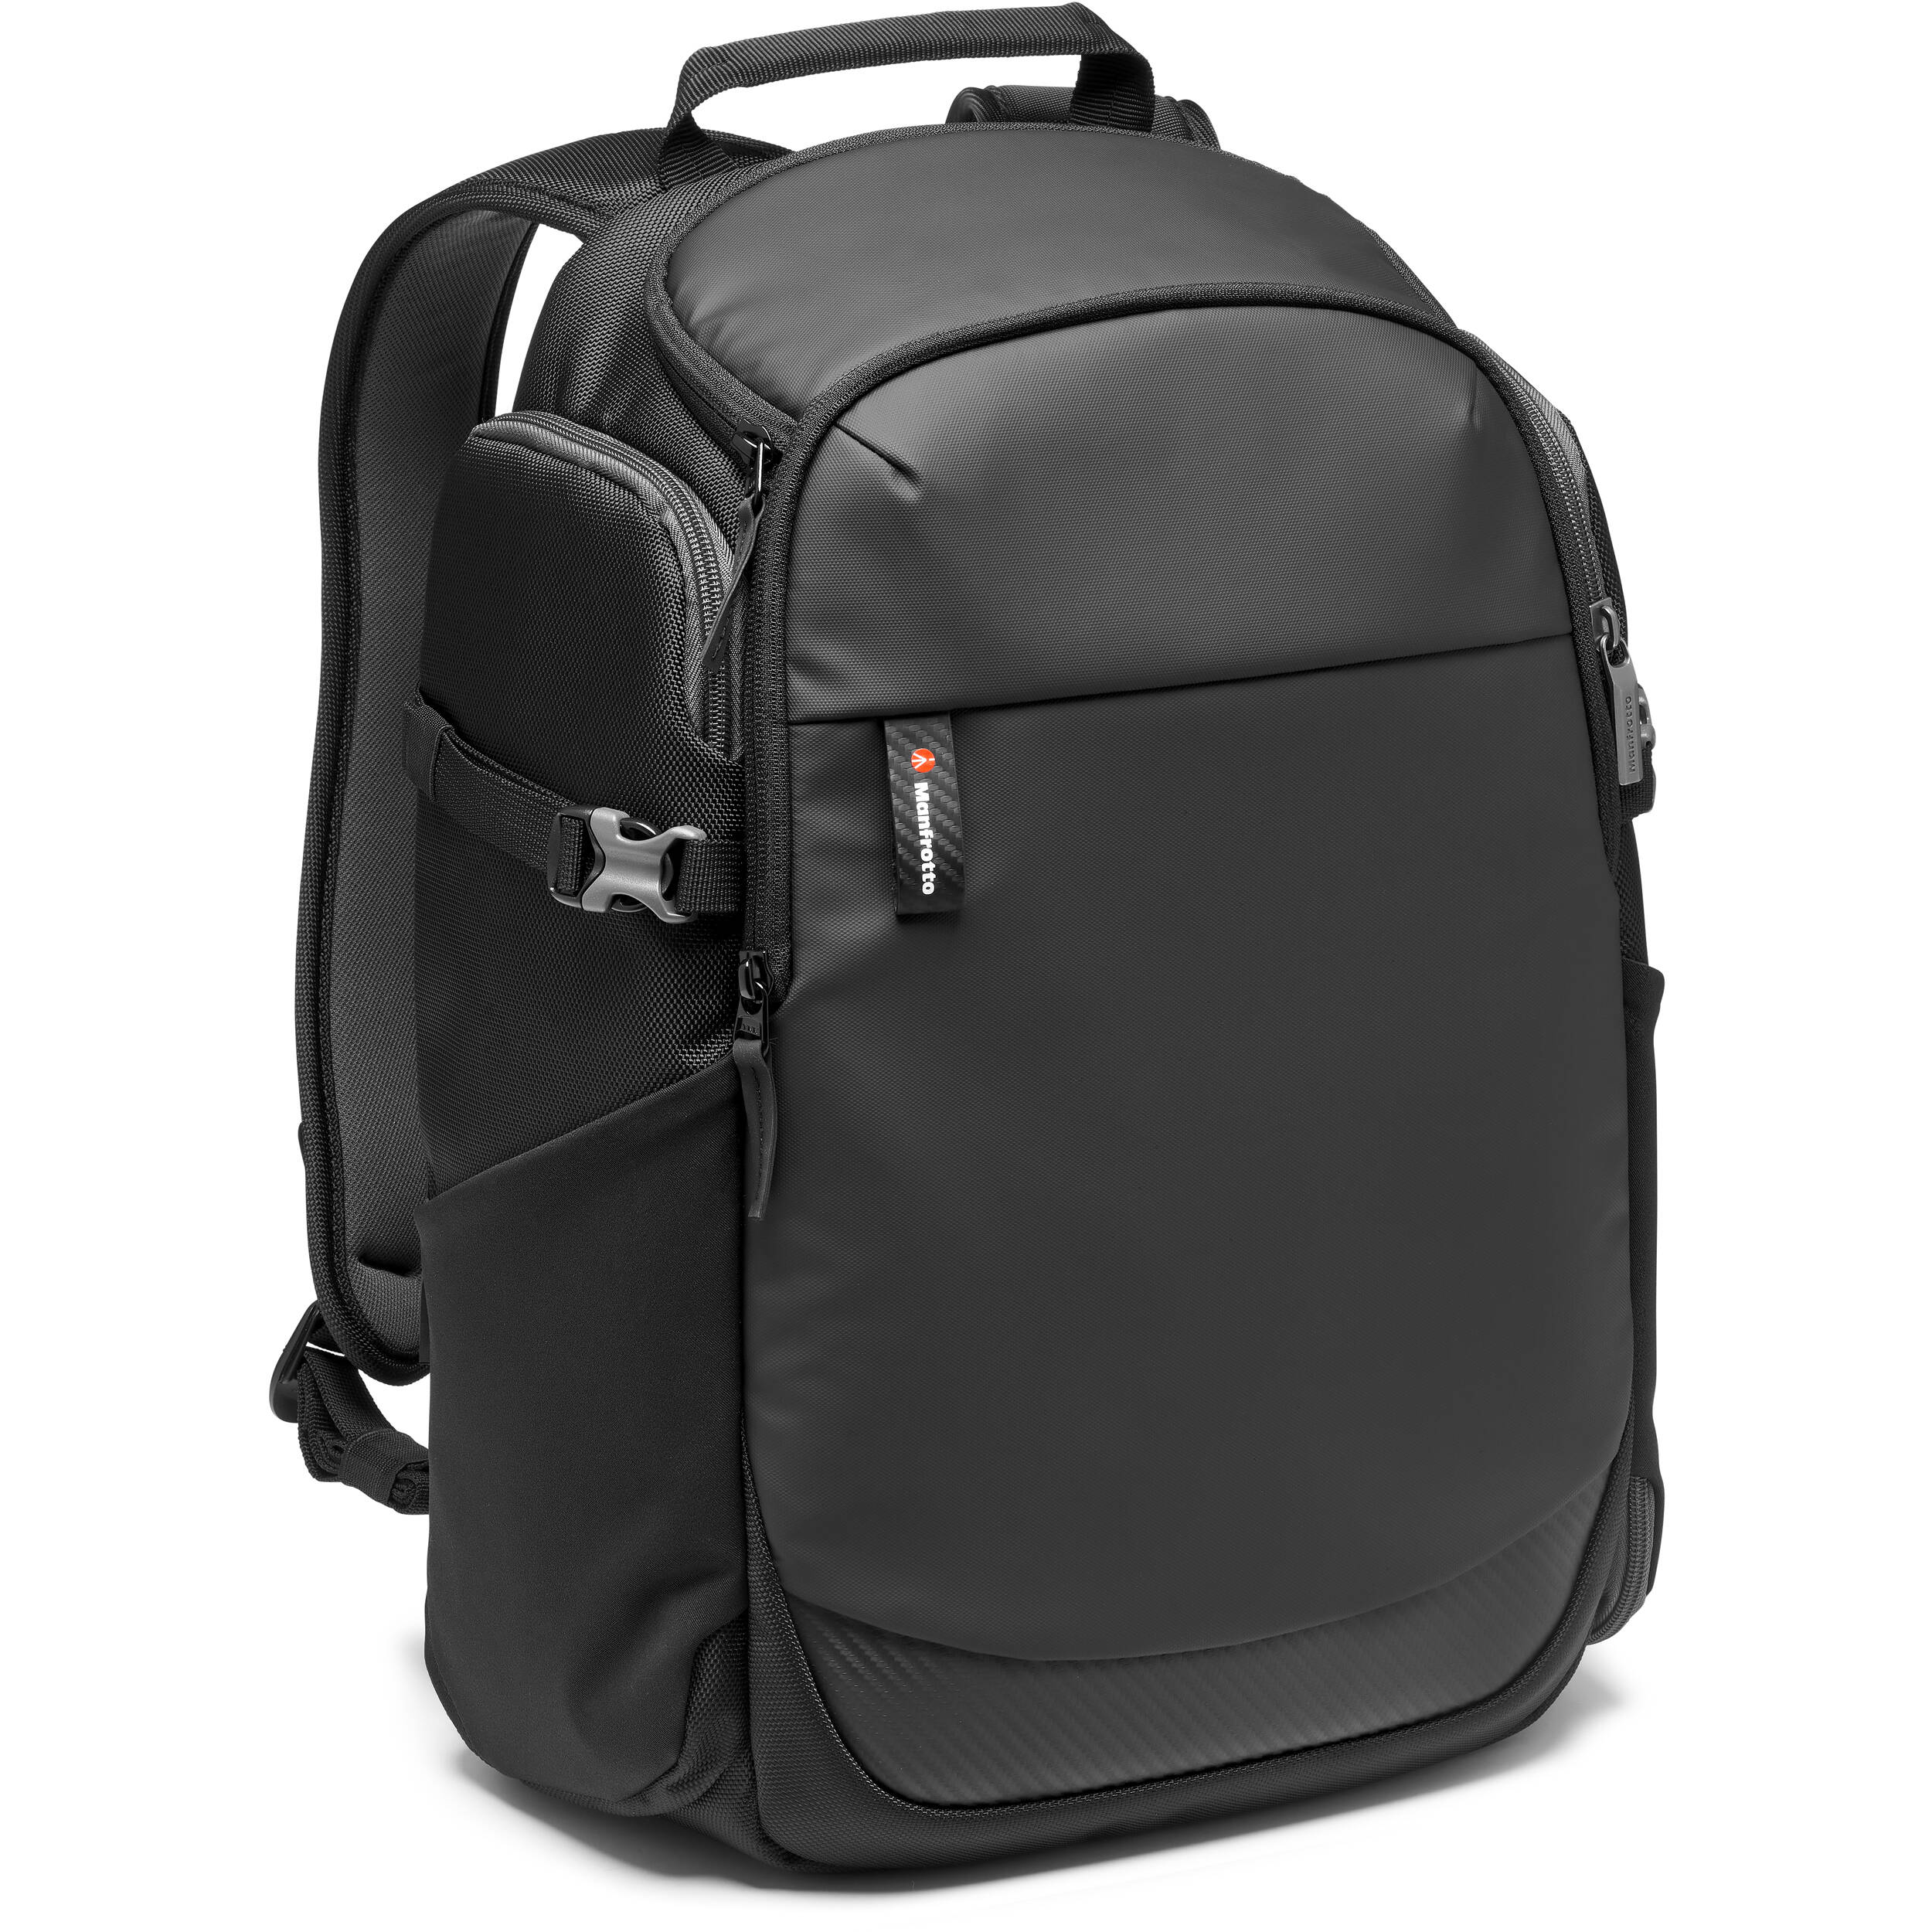 Manfrotto Advanced 2 Befree Camera/CSC/Drone Backpack